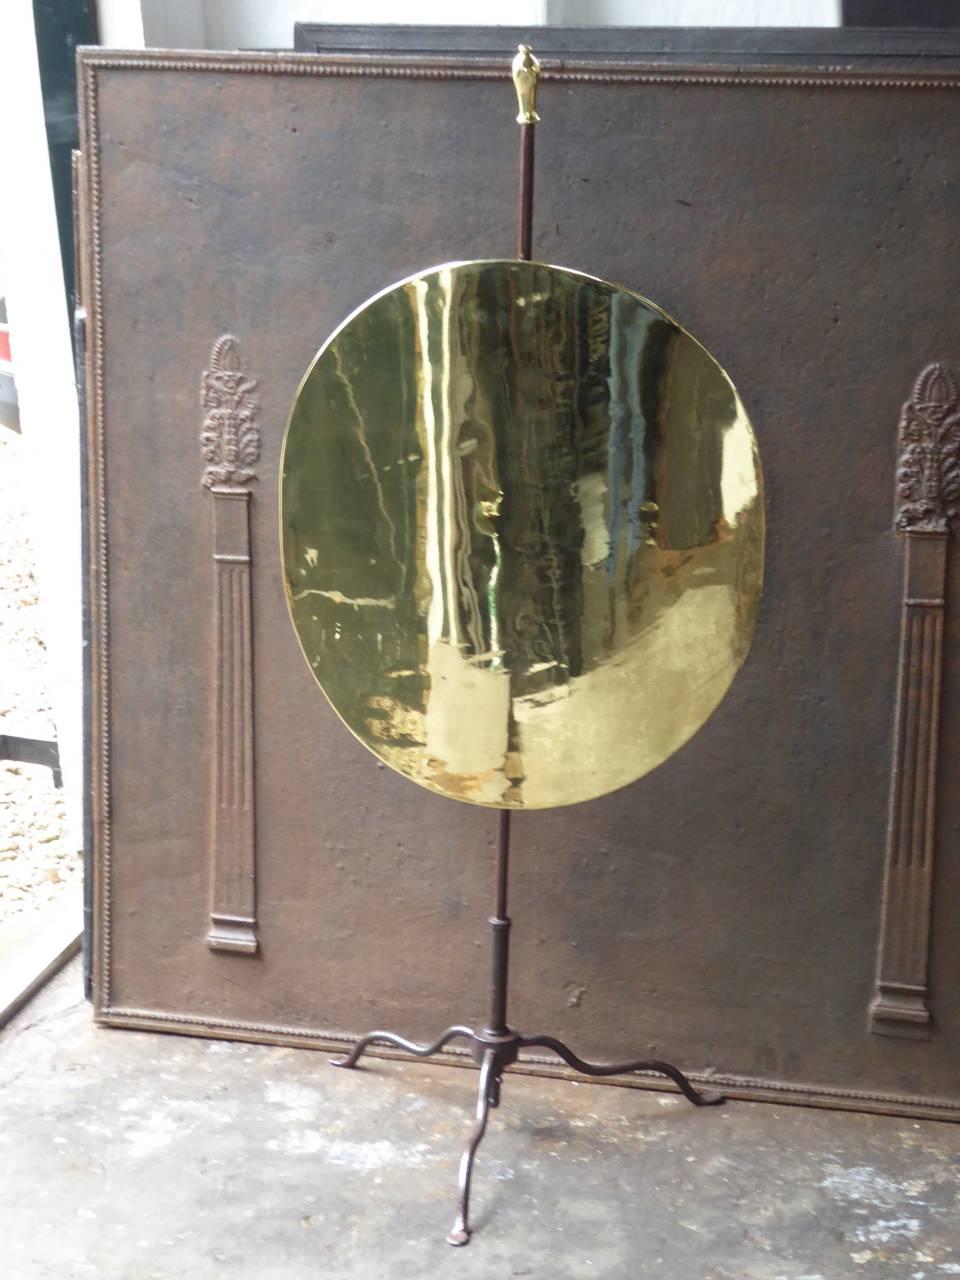 19th century French fire screen made of polished brass and wrought iron.